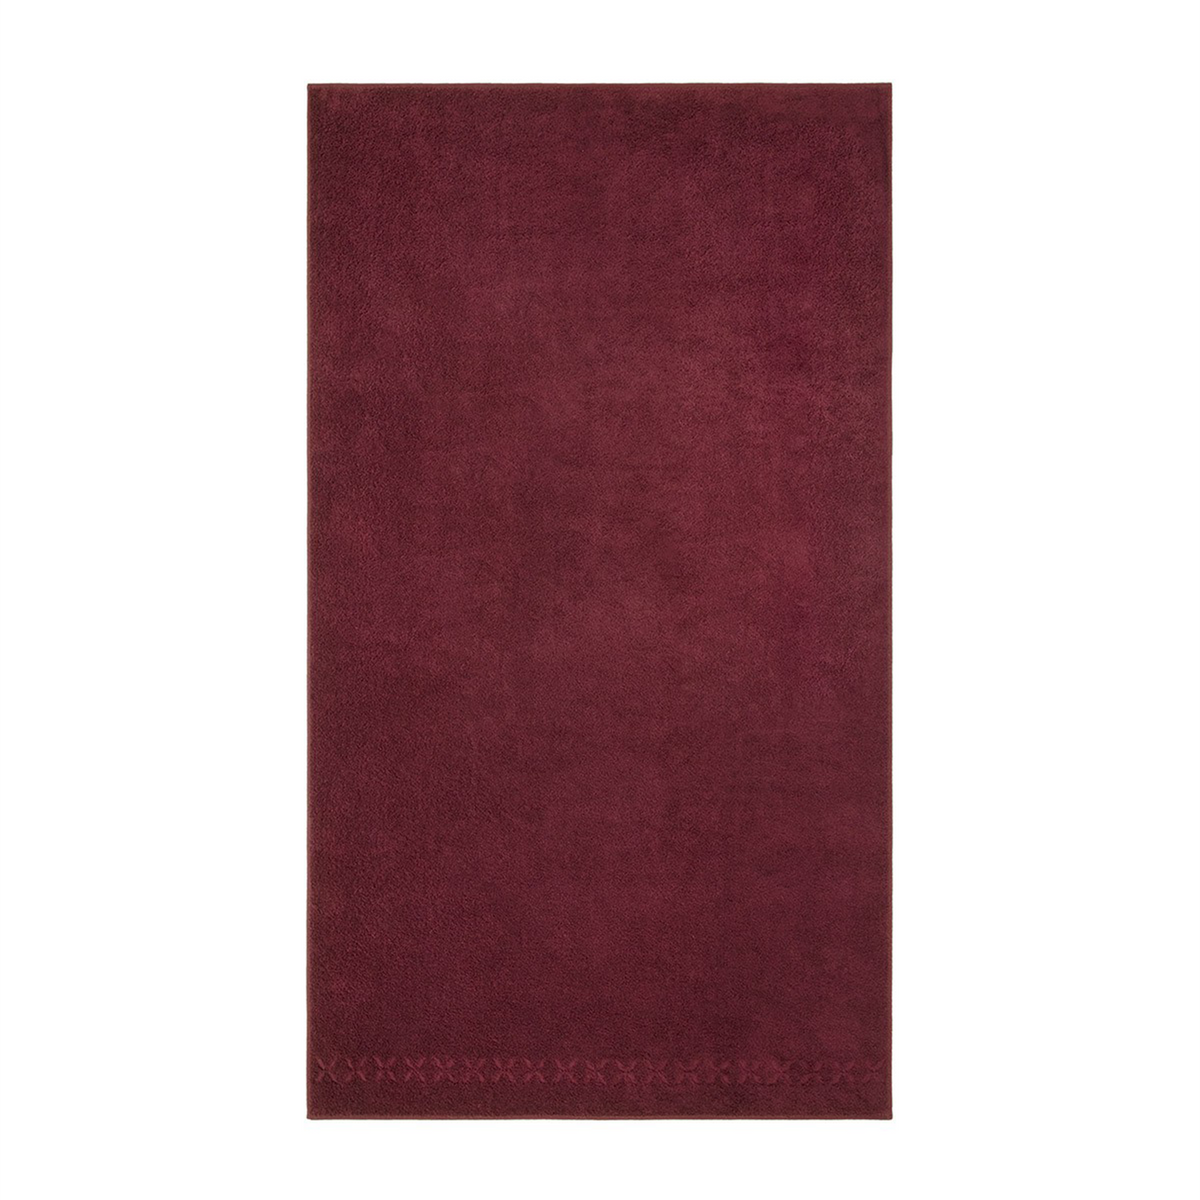 Silo Image of Yves Delorme Nature Bath Towels in Prune Color